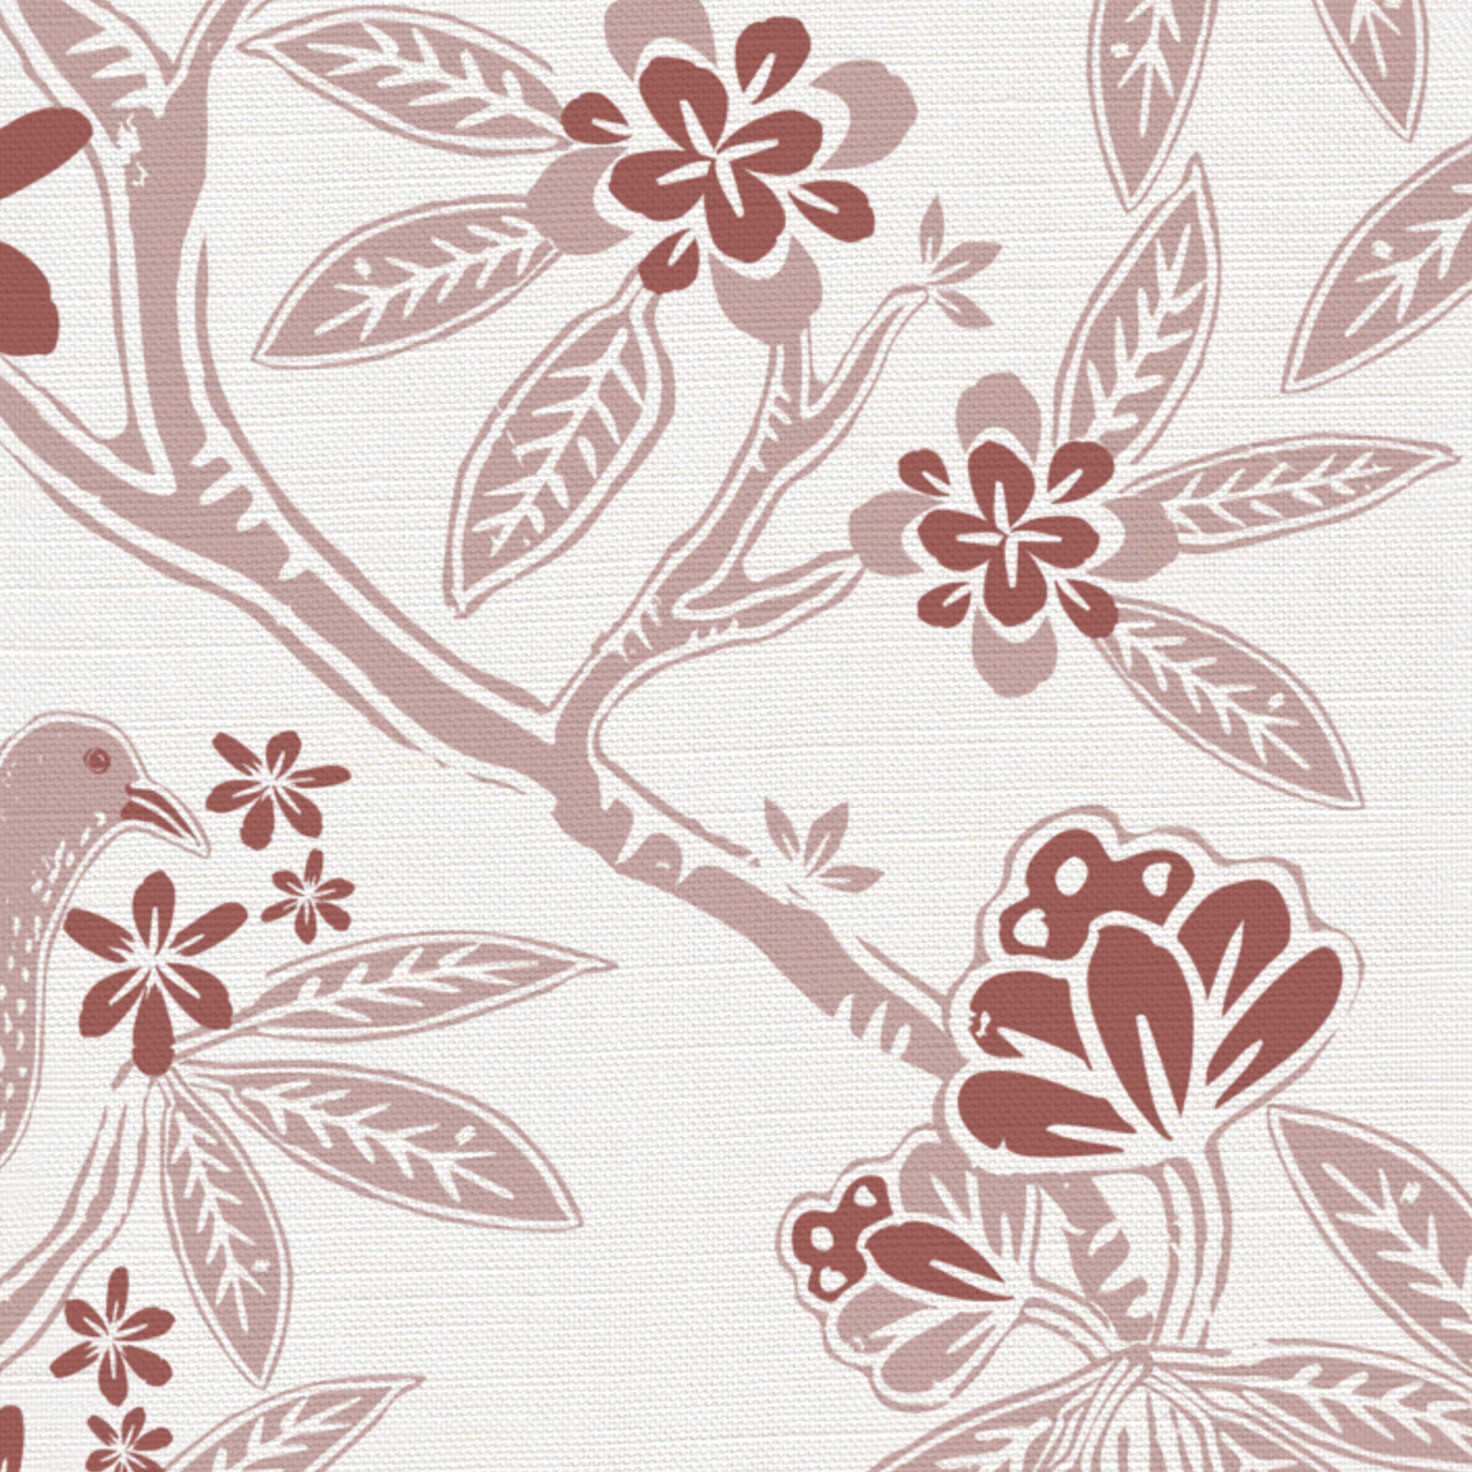 Birds & Bloom Fabric in Pink on a White Background